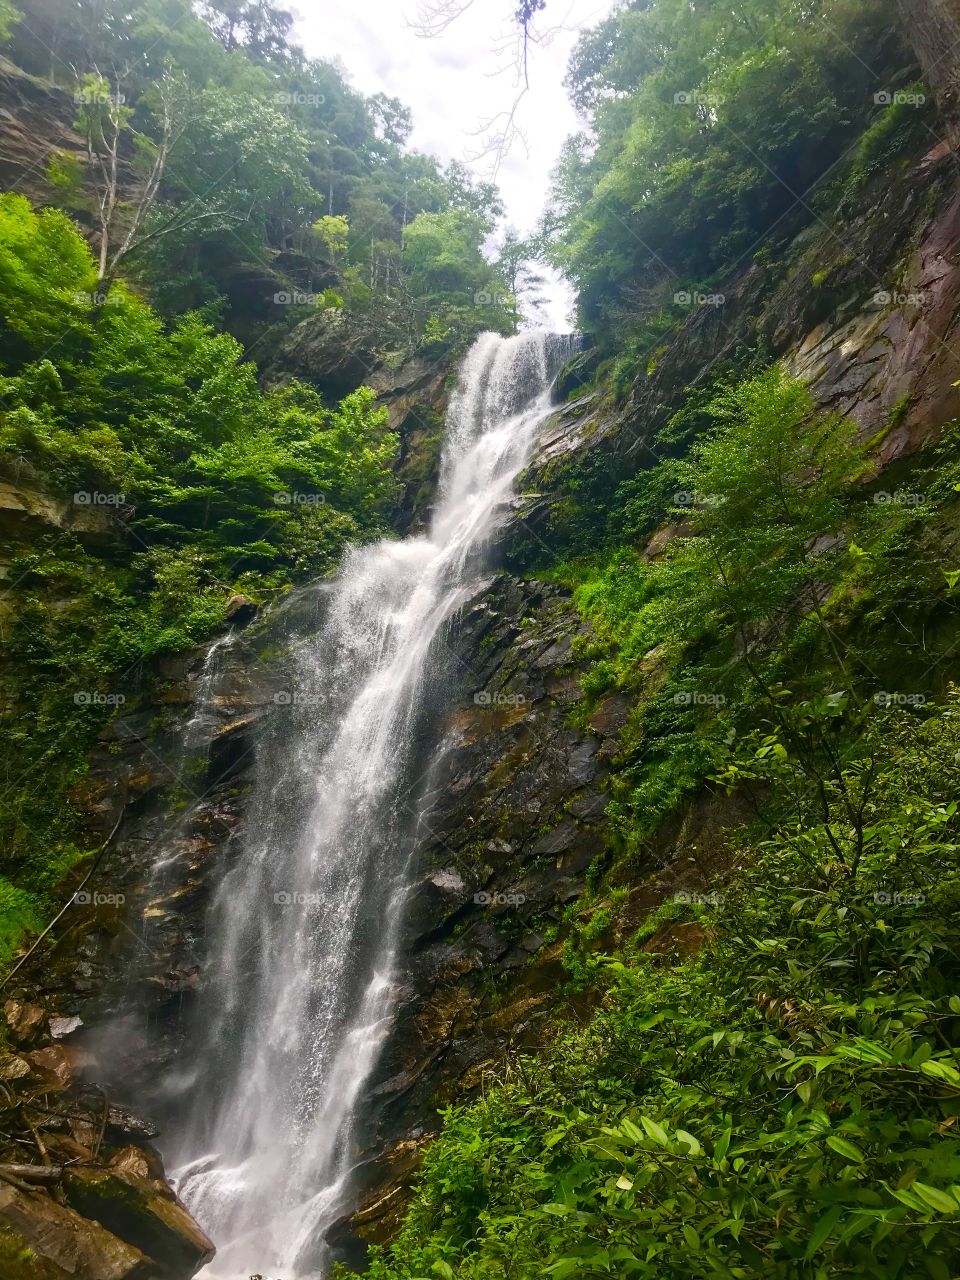 We love the Smokies! Here’s a beautiful waterfall to showcase how Mother Nature blessed the Smokies with beautiful sites!